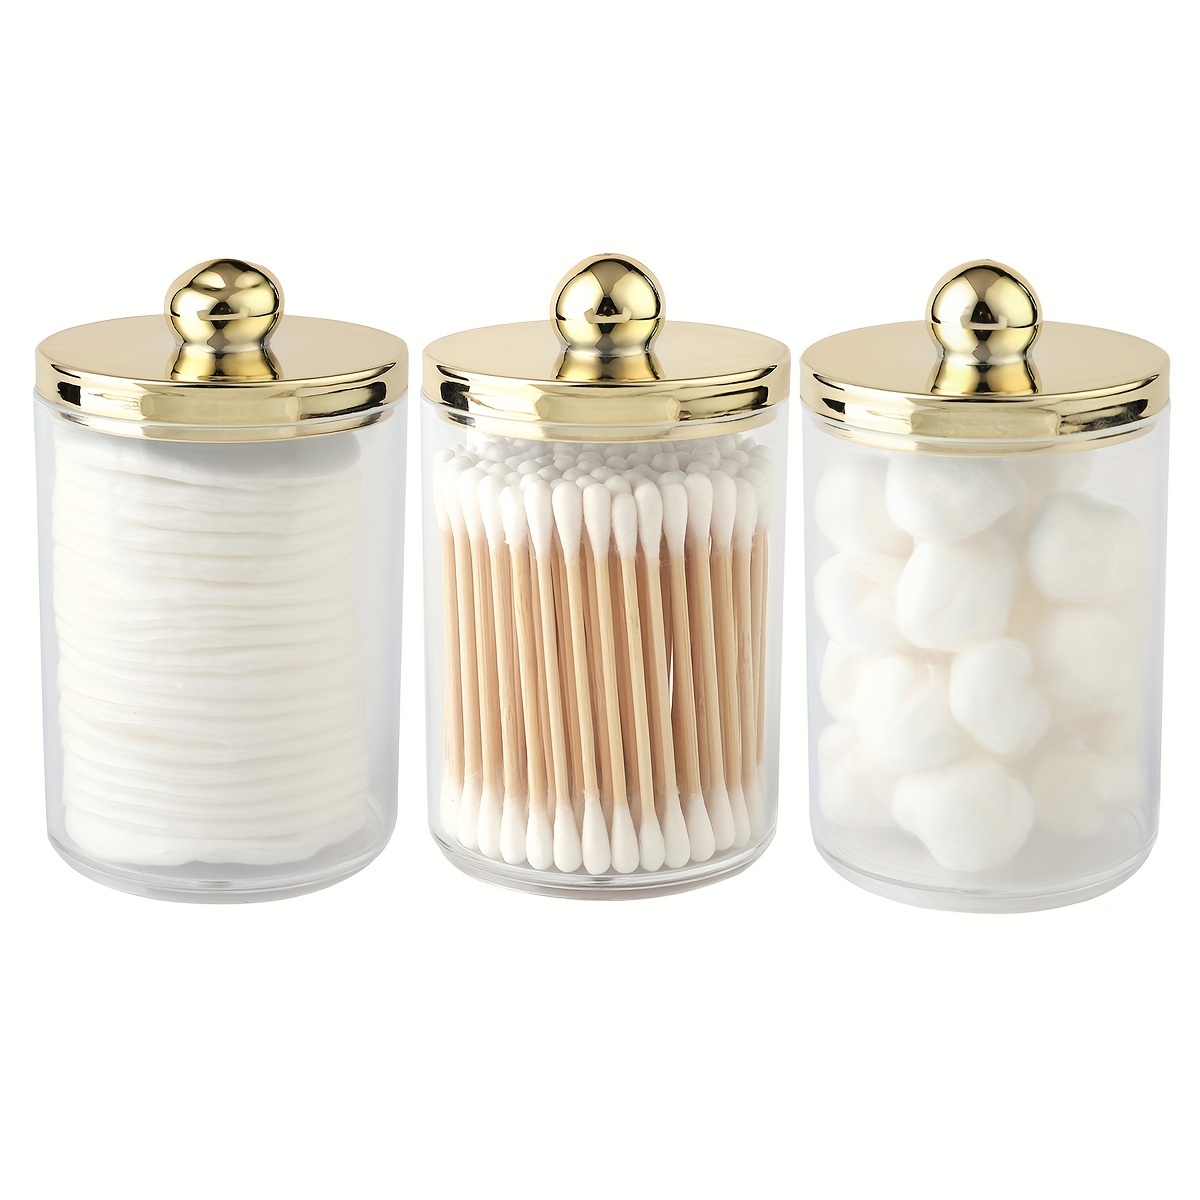 

Elegant 10 Oz Clear Cotton Swab Holder With Lid - Apothecary Jar Design, Makeup Organizer & Bathroom Dispenser For Cotton Balls And Pads